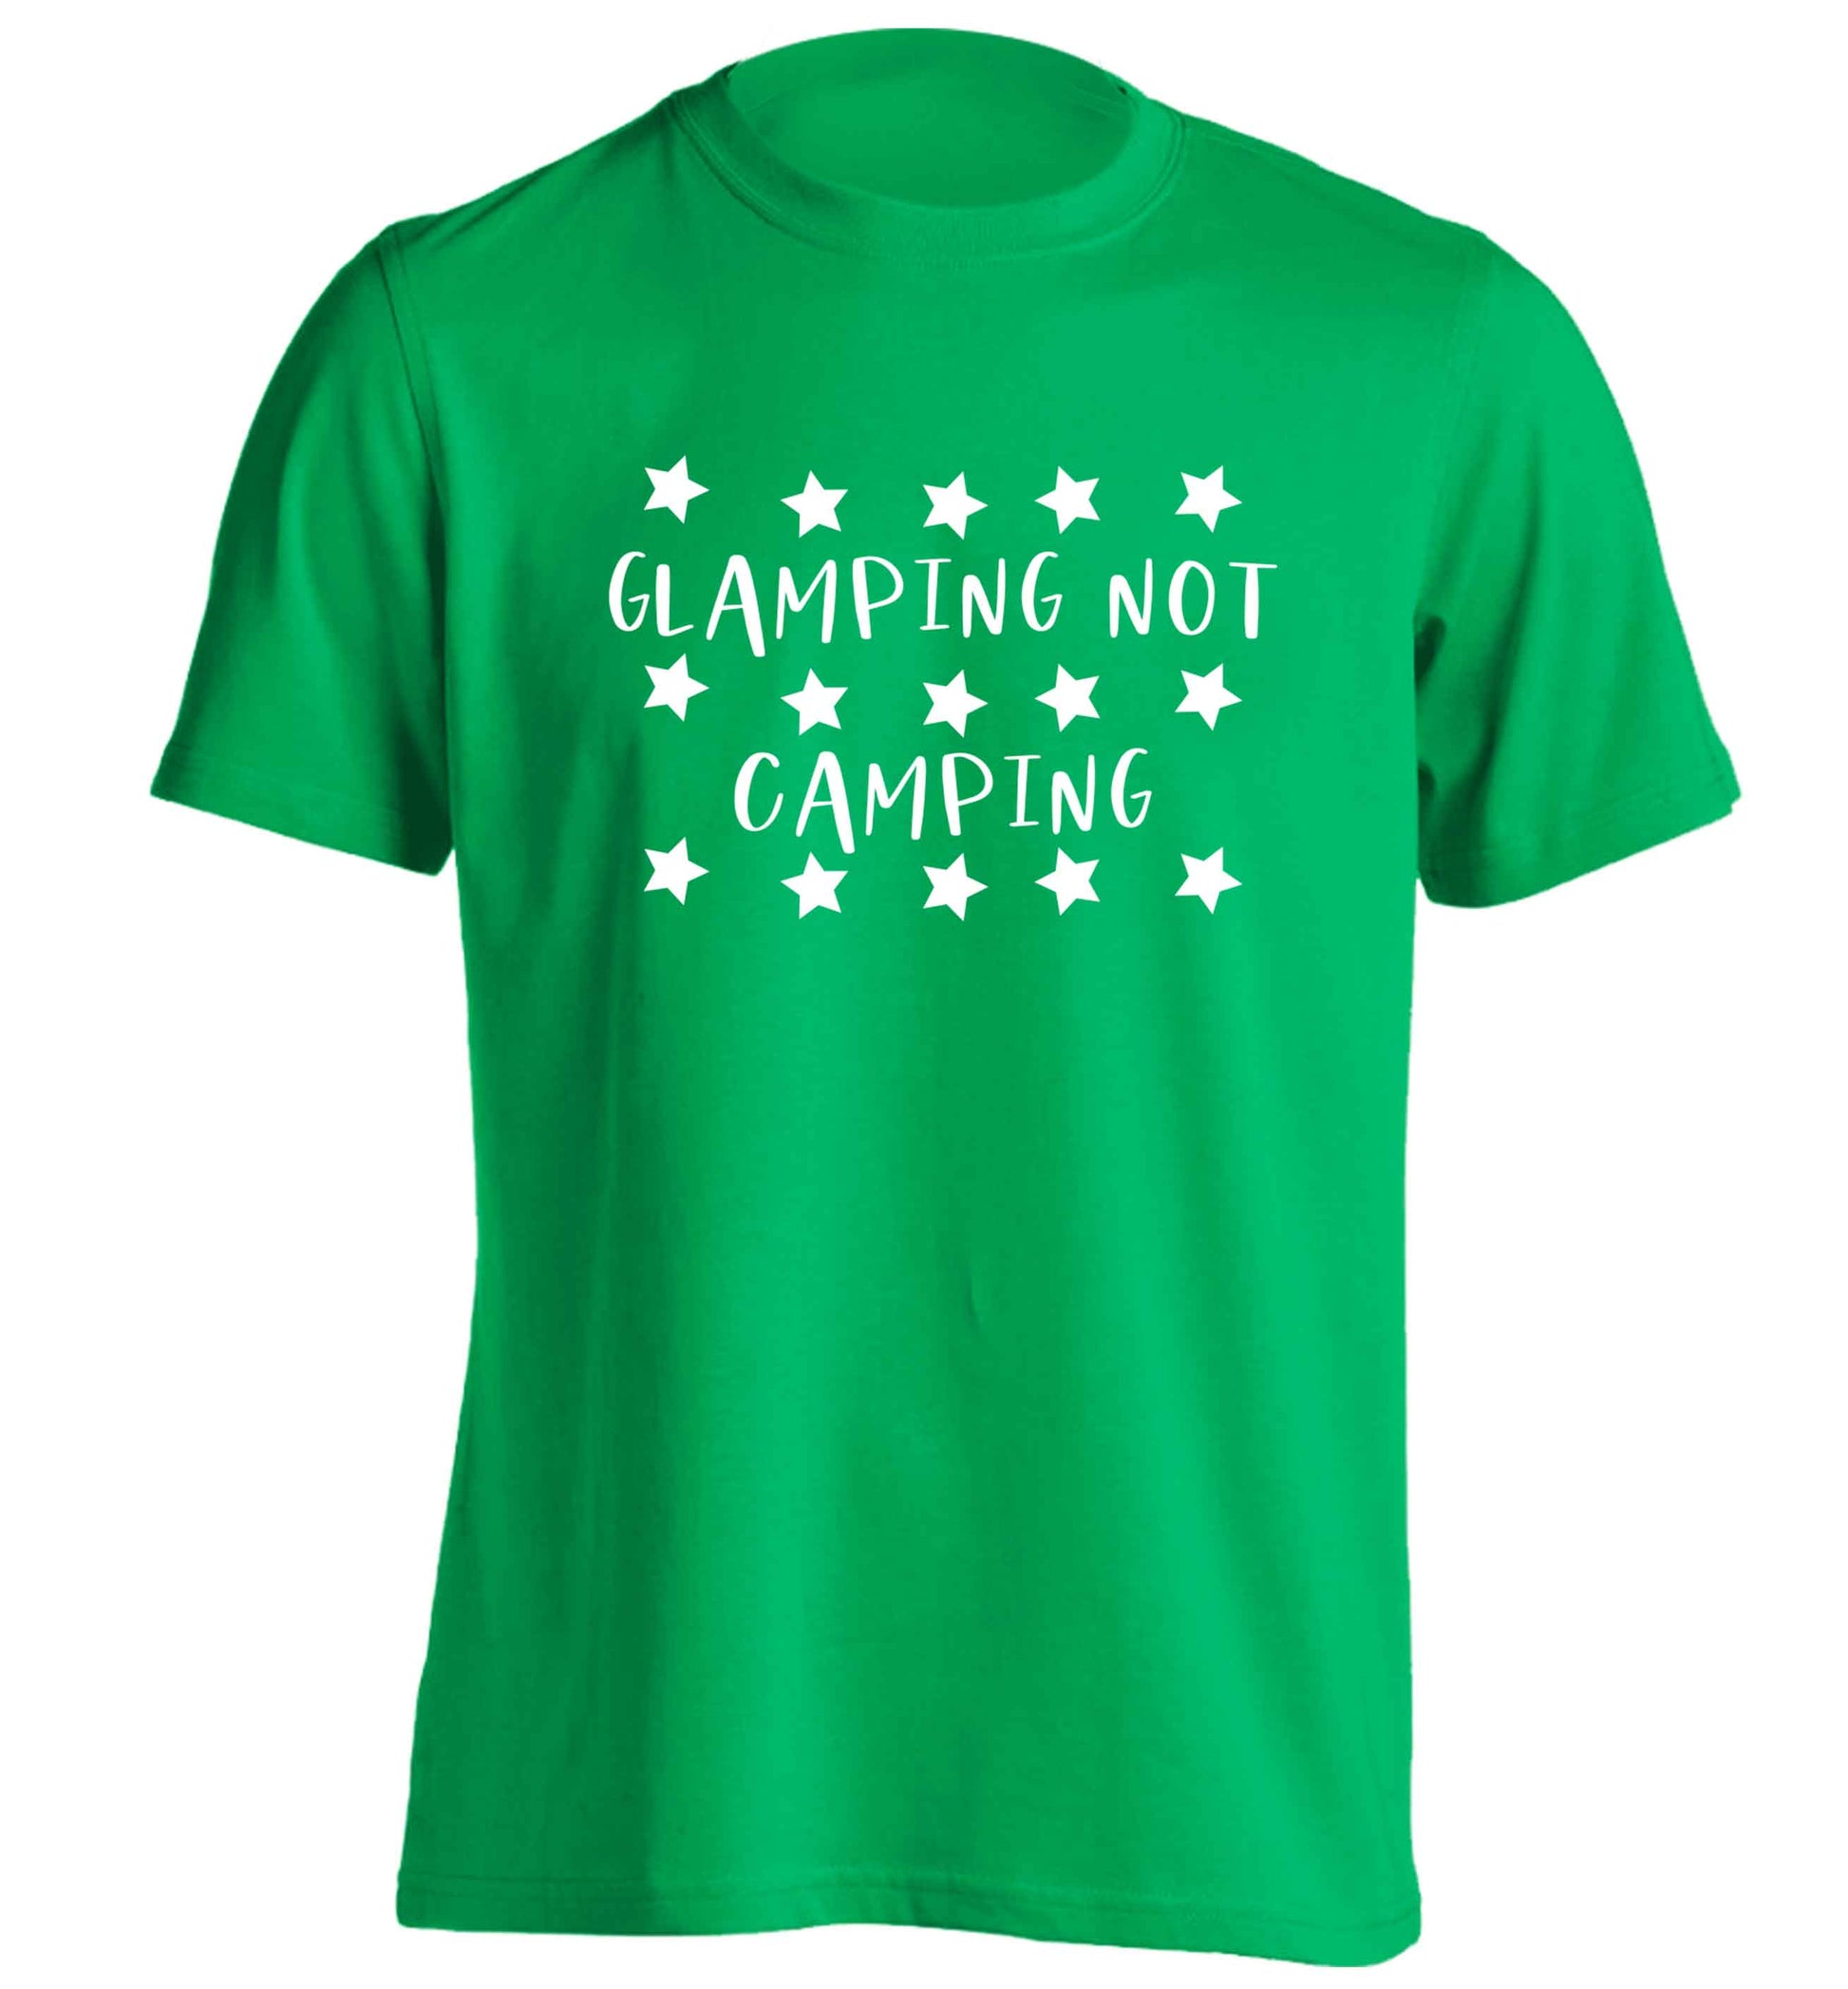 Glamping not camping adults unisex green Tshirt 2XL